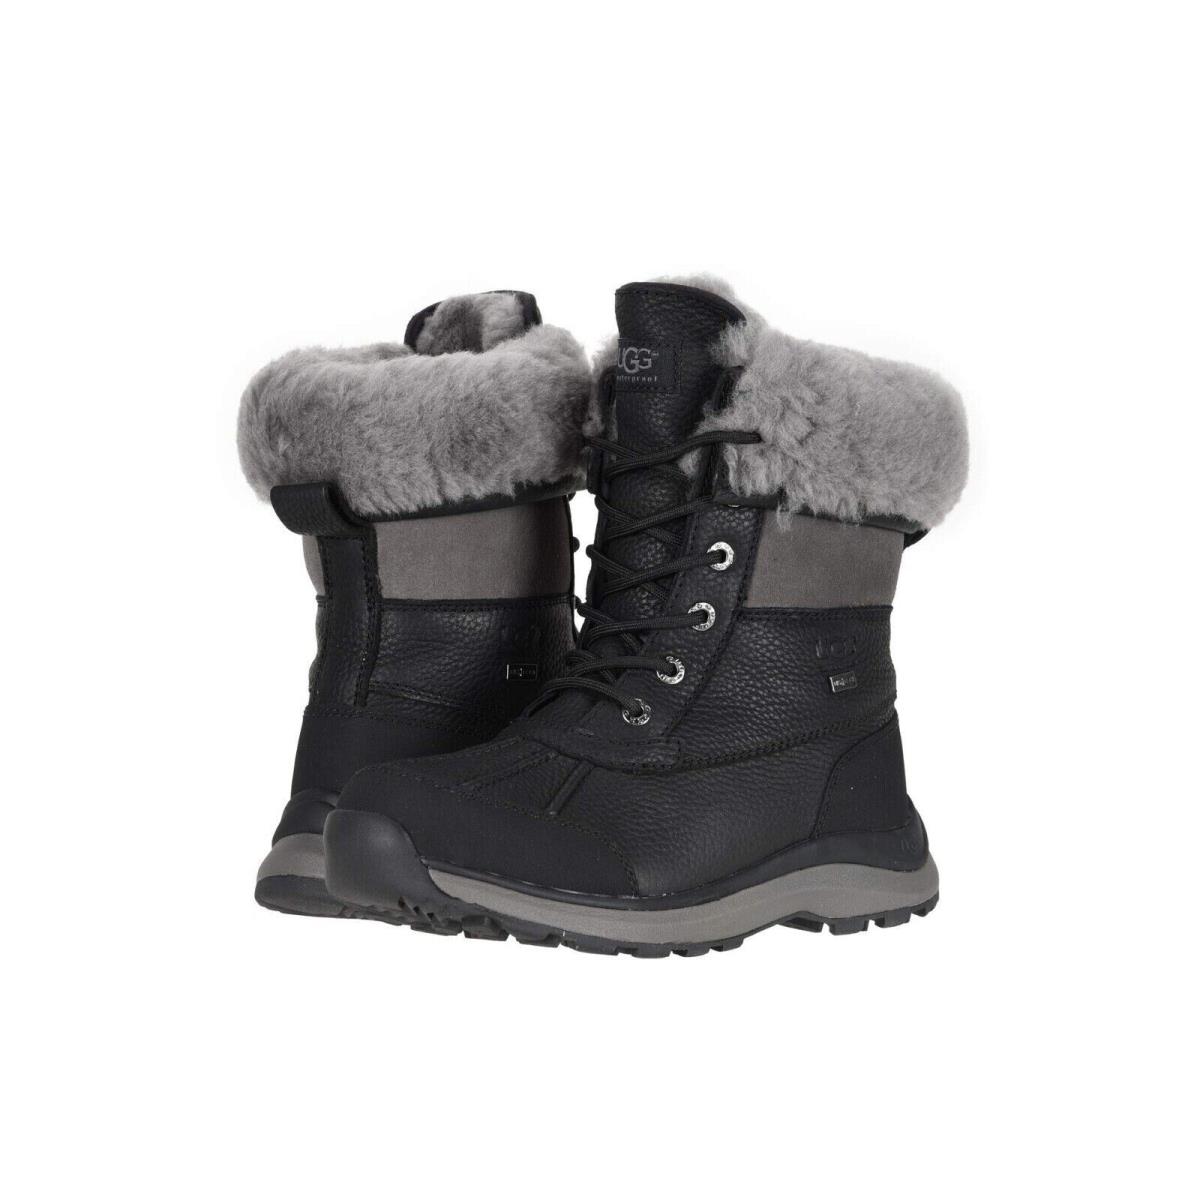 Women`s Shoes Ugg Adirondack Iii Leather/suede Winter Boots 1095141 Black 6.5/6